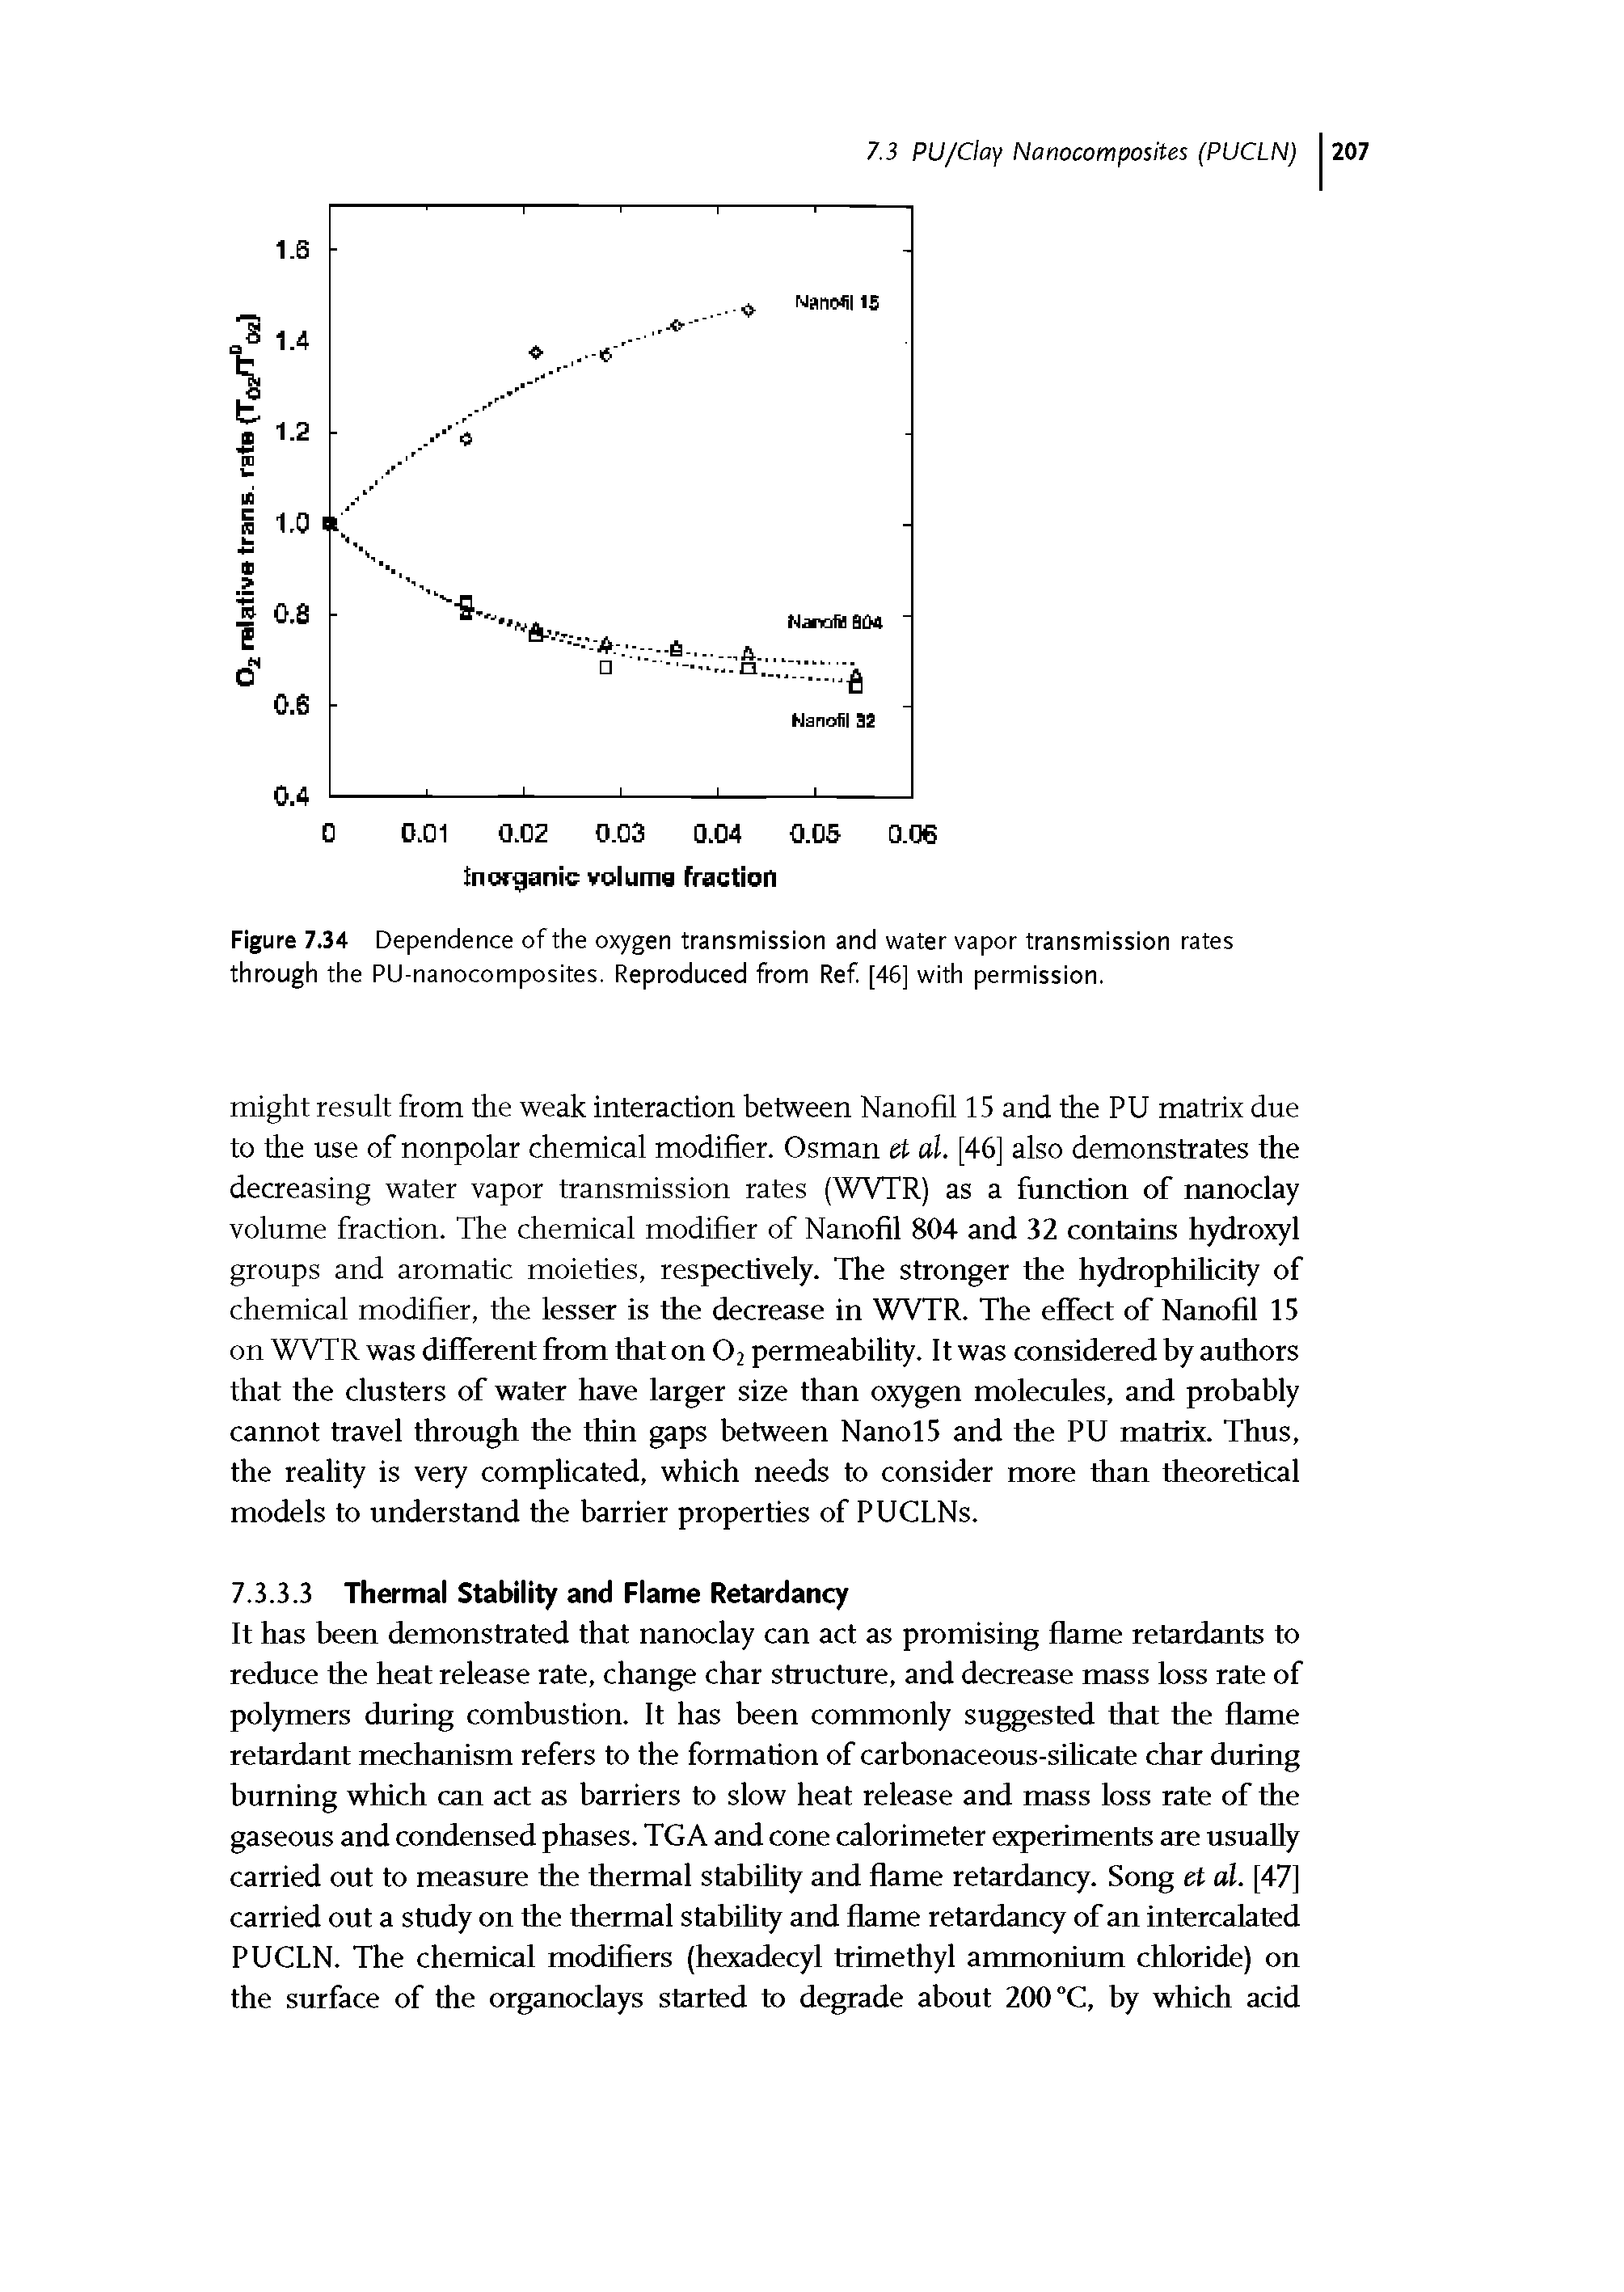 Figure 7.34 Dependence of the oxygen transmission and water vapor transmission rates through the PU-nanocomposites. Reproduced from Ref [46] with permission.